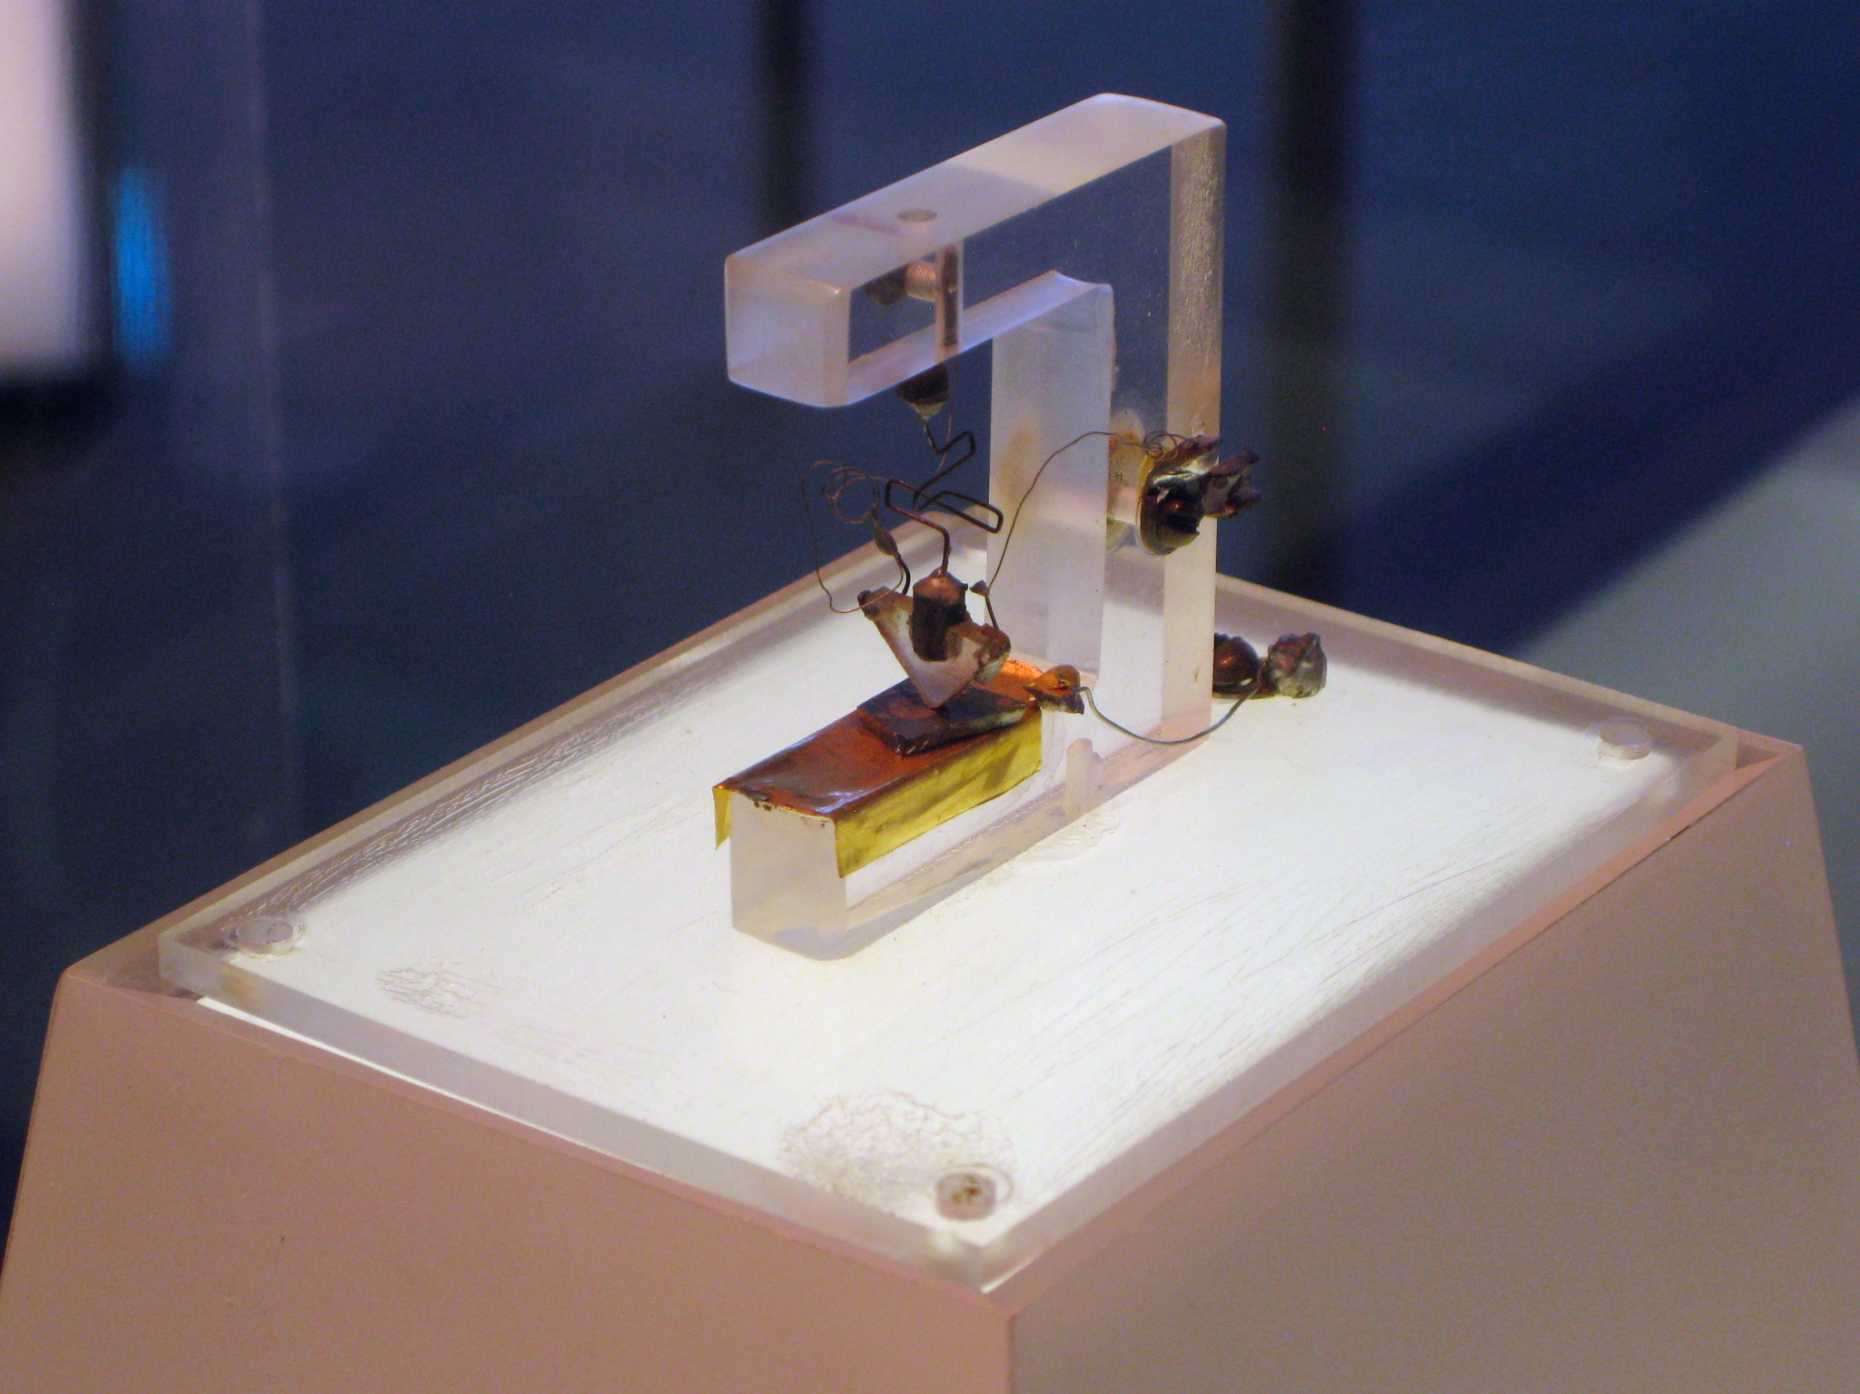 The first working transistor